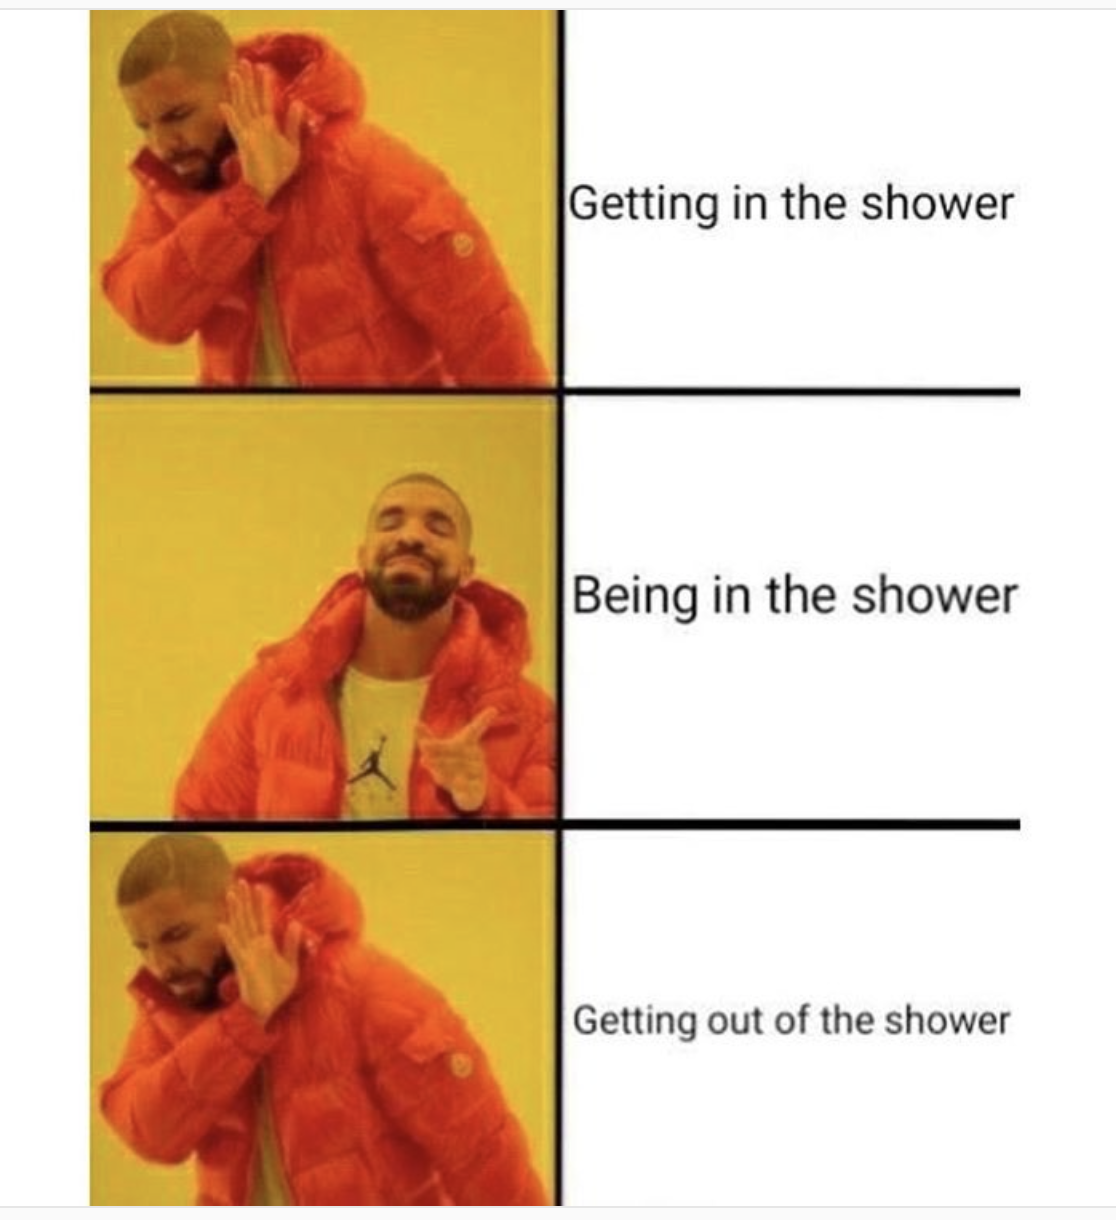 shower meme - Getting in the shower Being in the shower Getting out of the shower